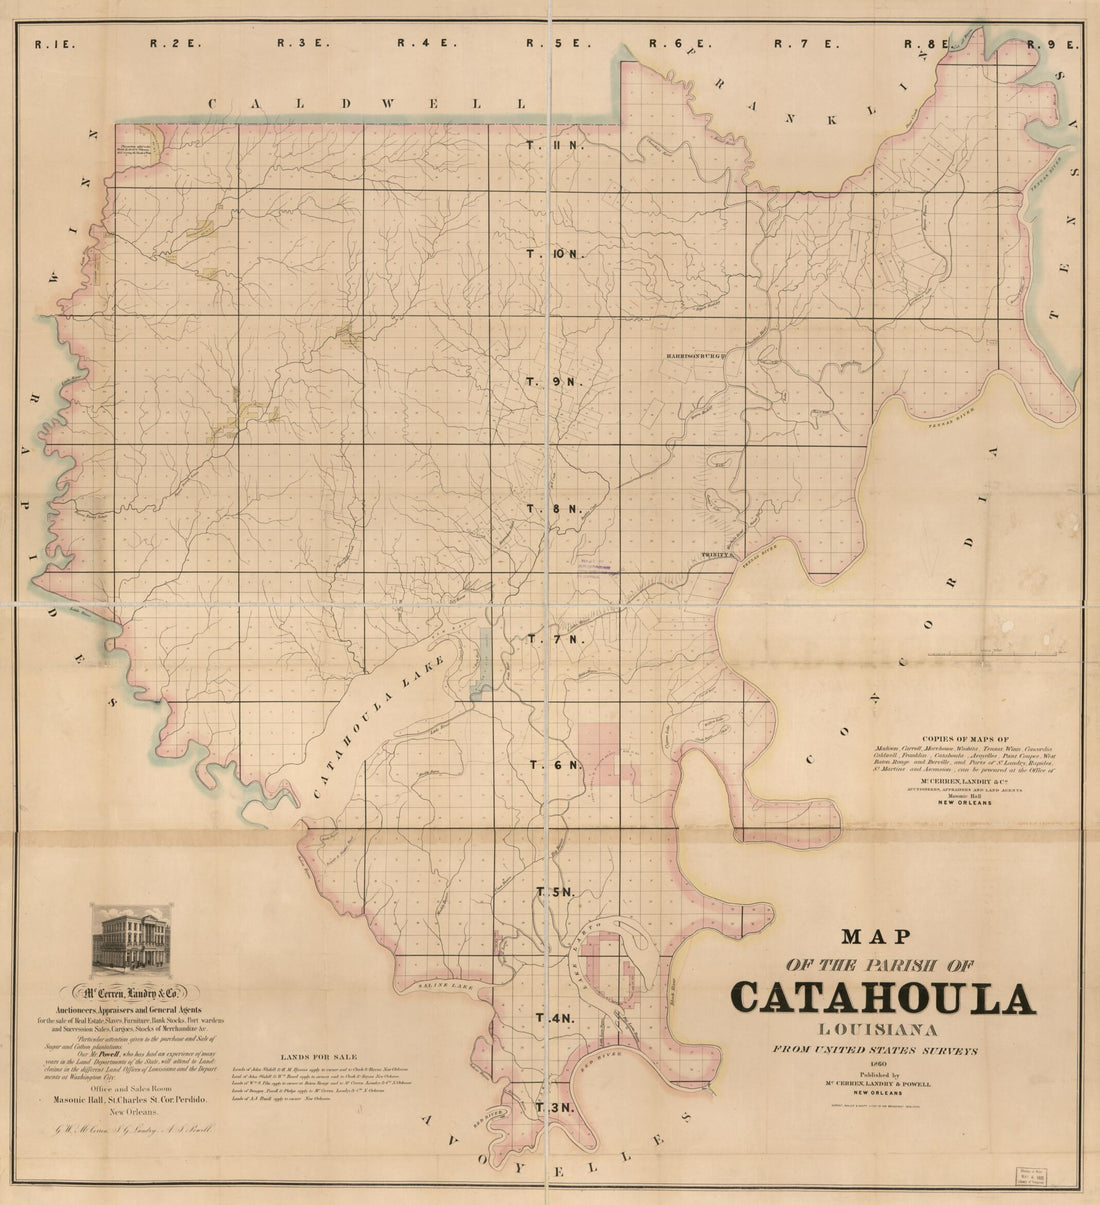 This old map of Map of the Parish of Catahoula, Louisiana : from United States Surveys from 1860 was created by Landry &amp; Powell McCerren in 1860